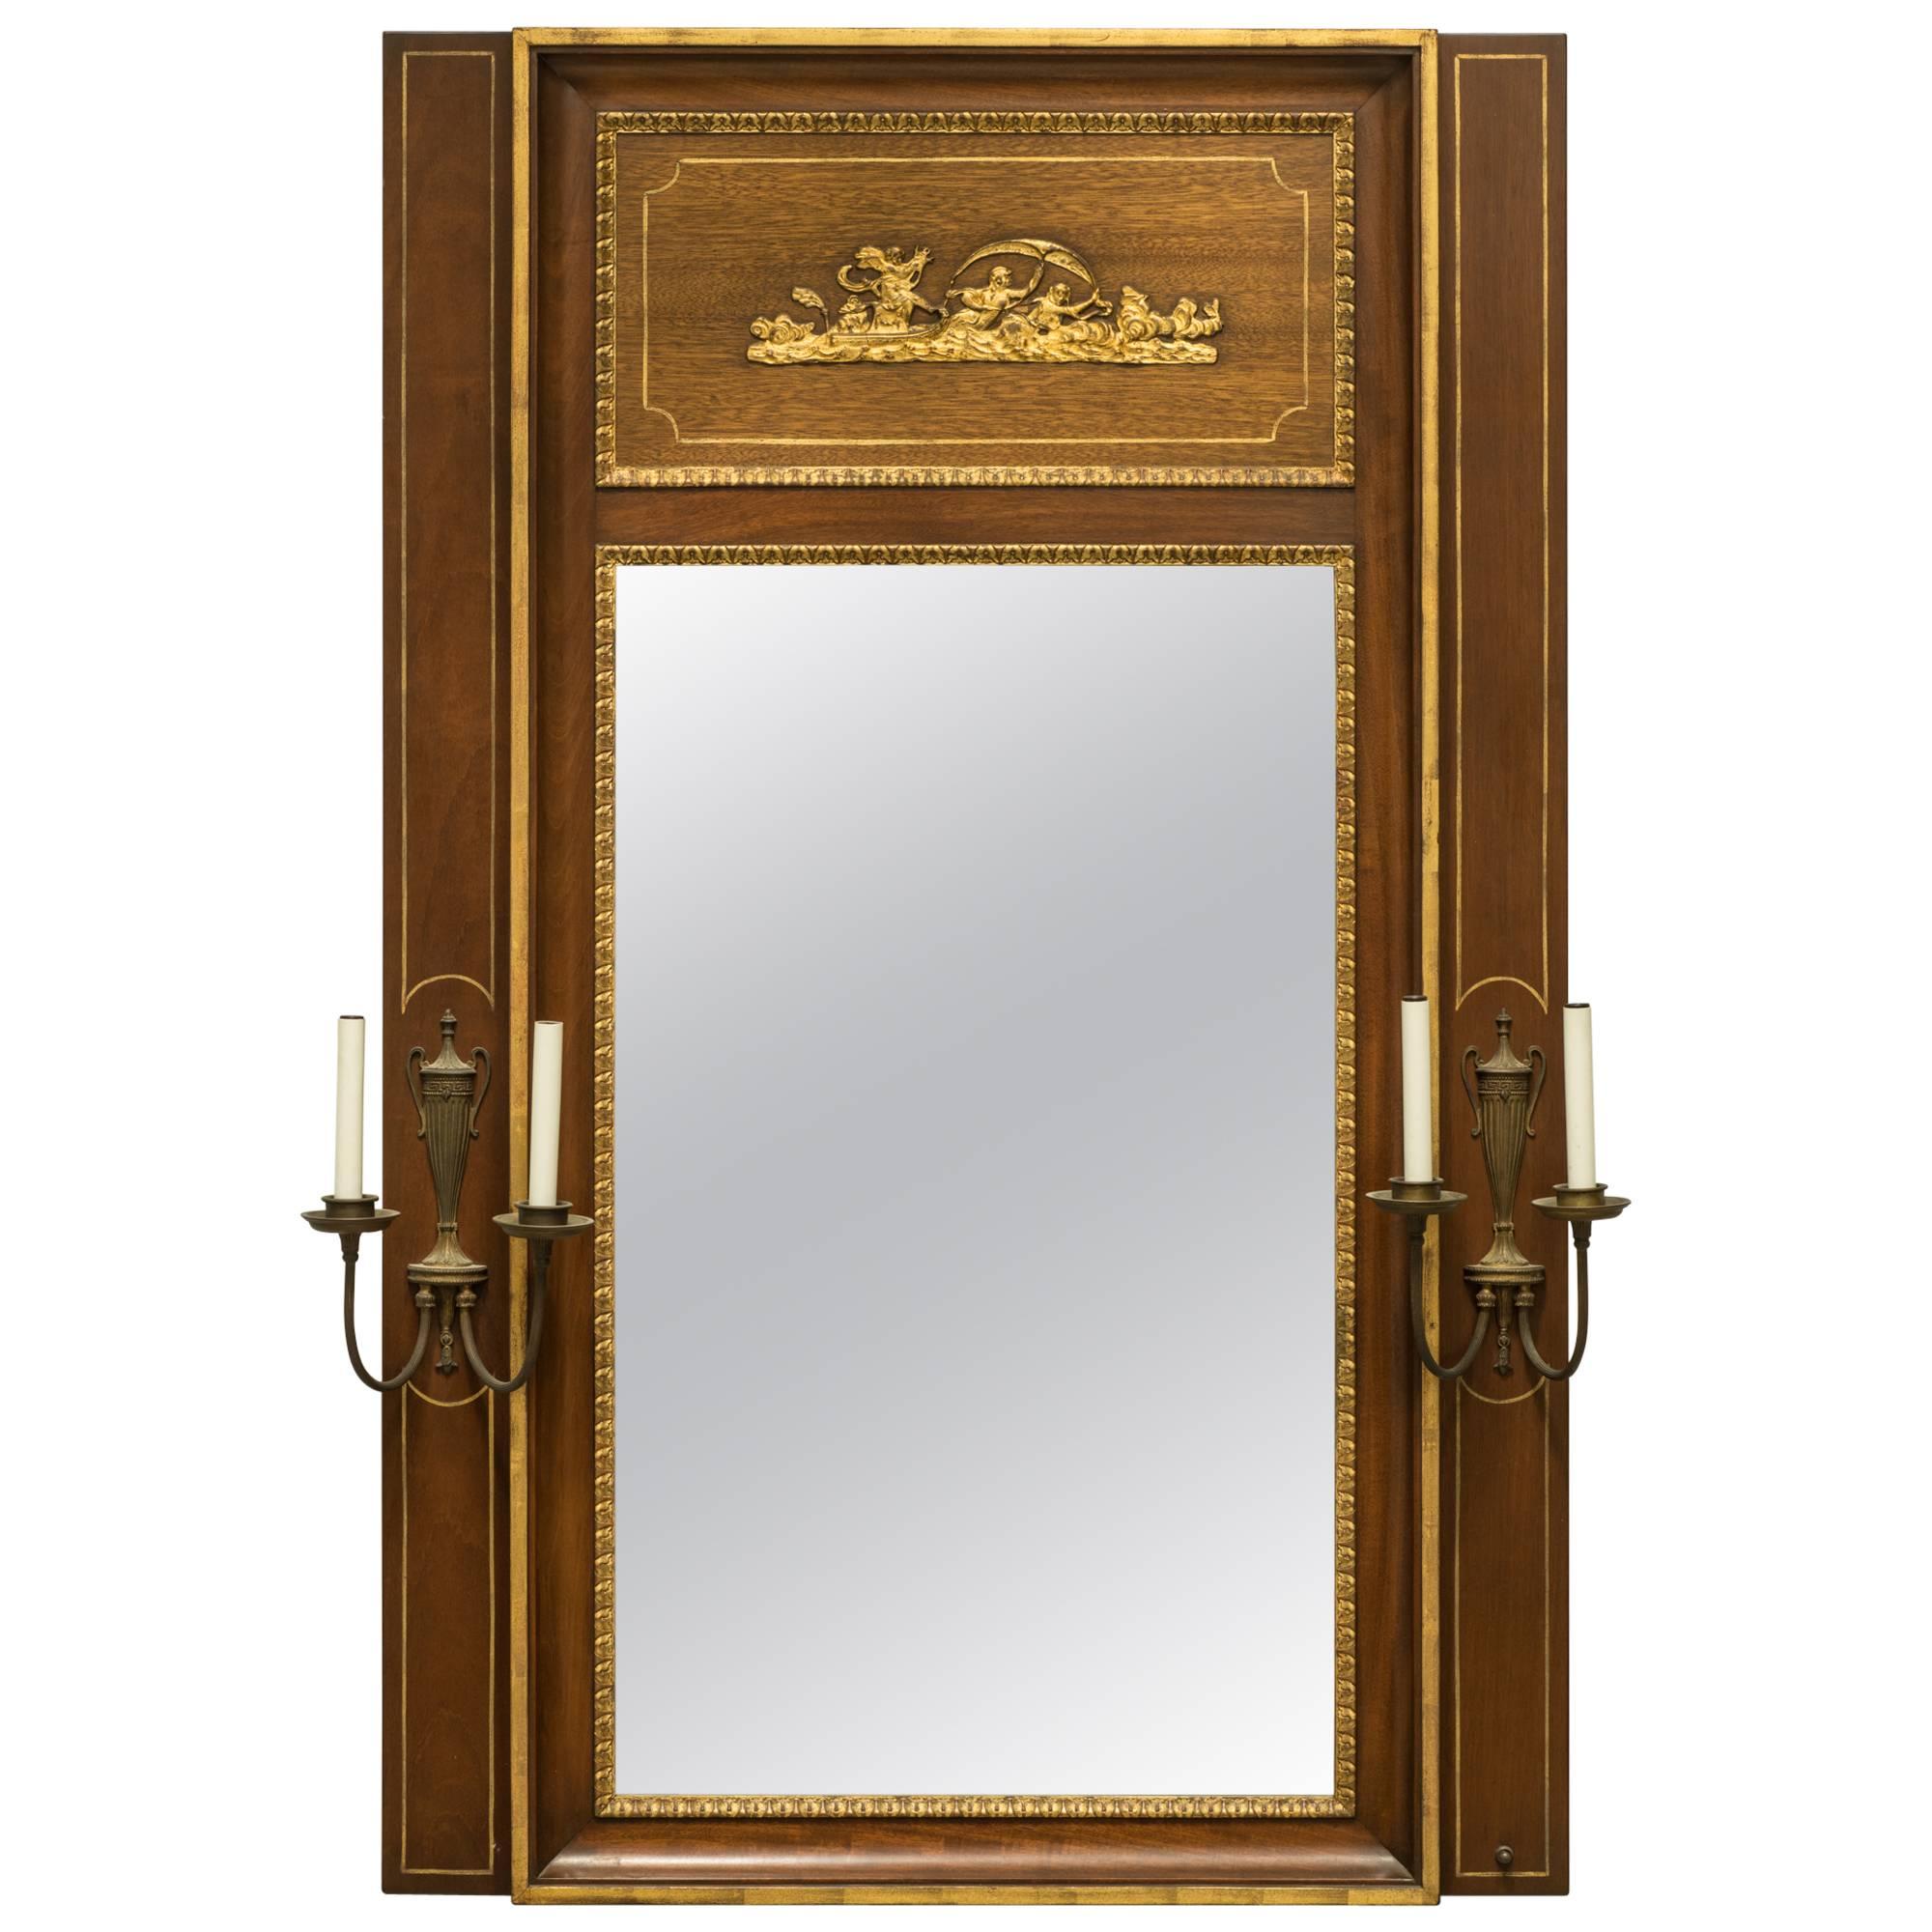 Italian Classical Trumeau Mirror with Sconces